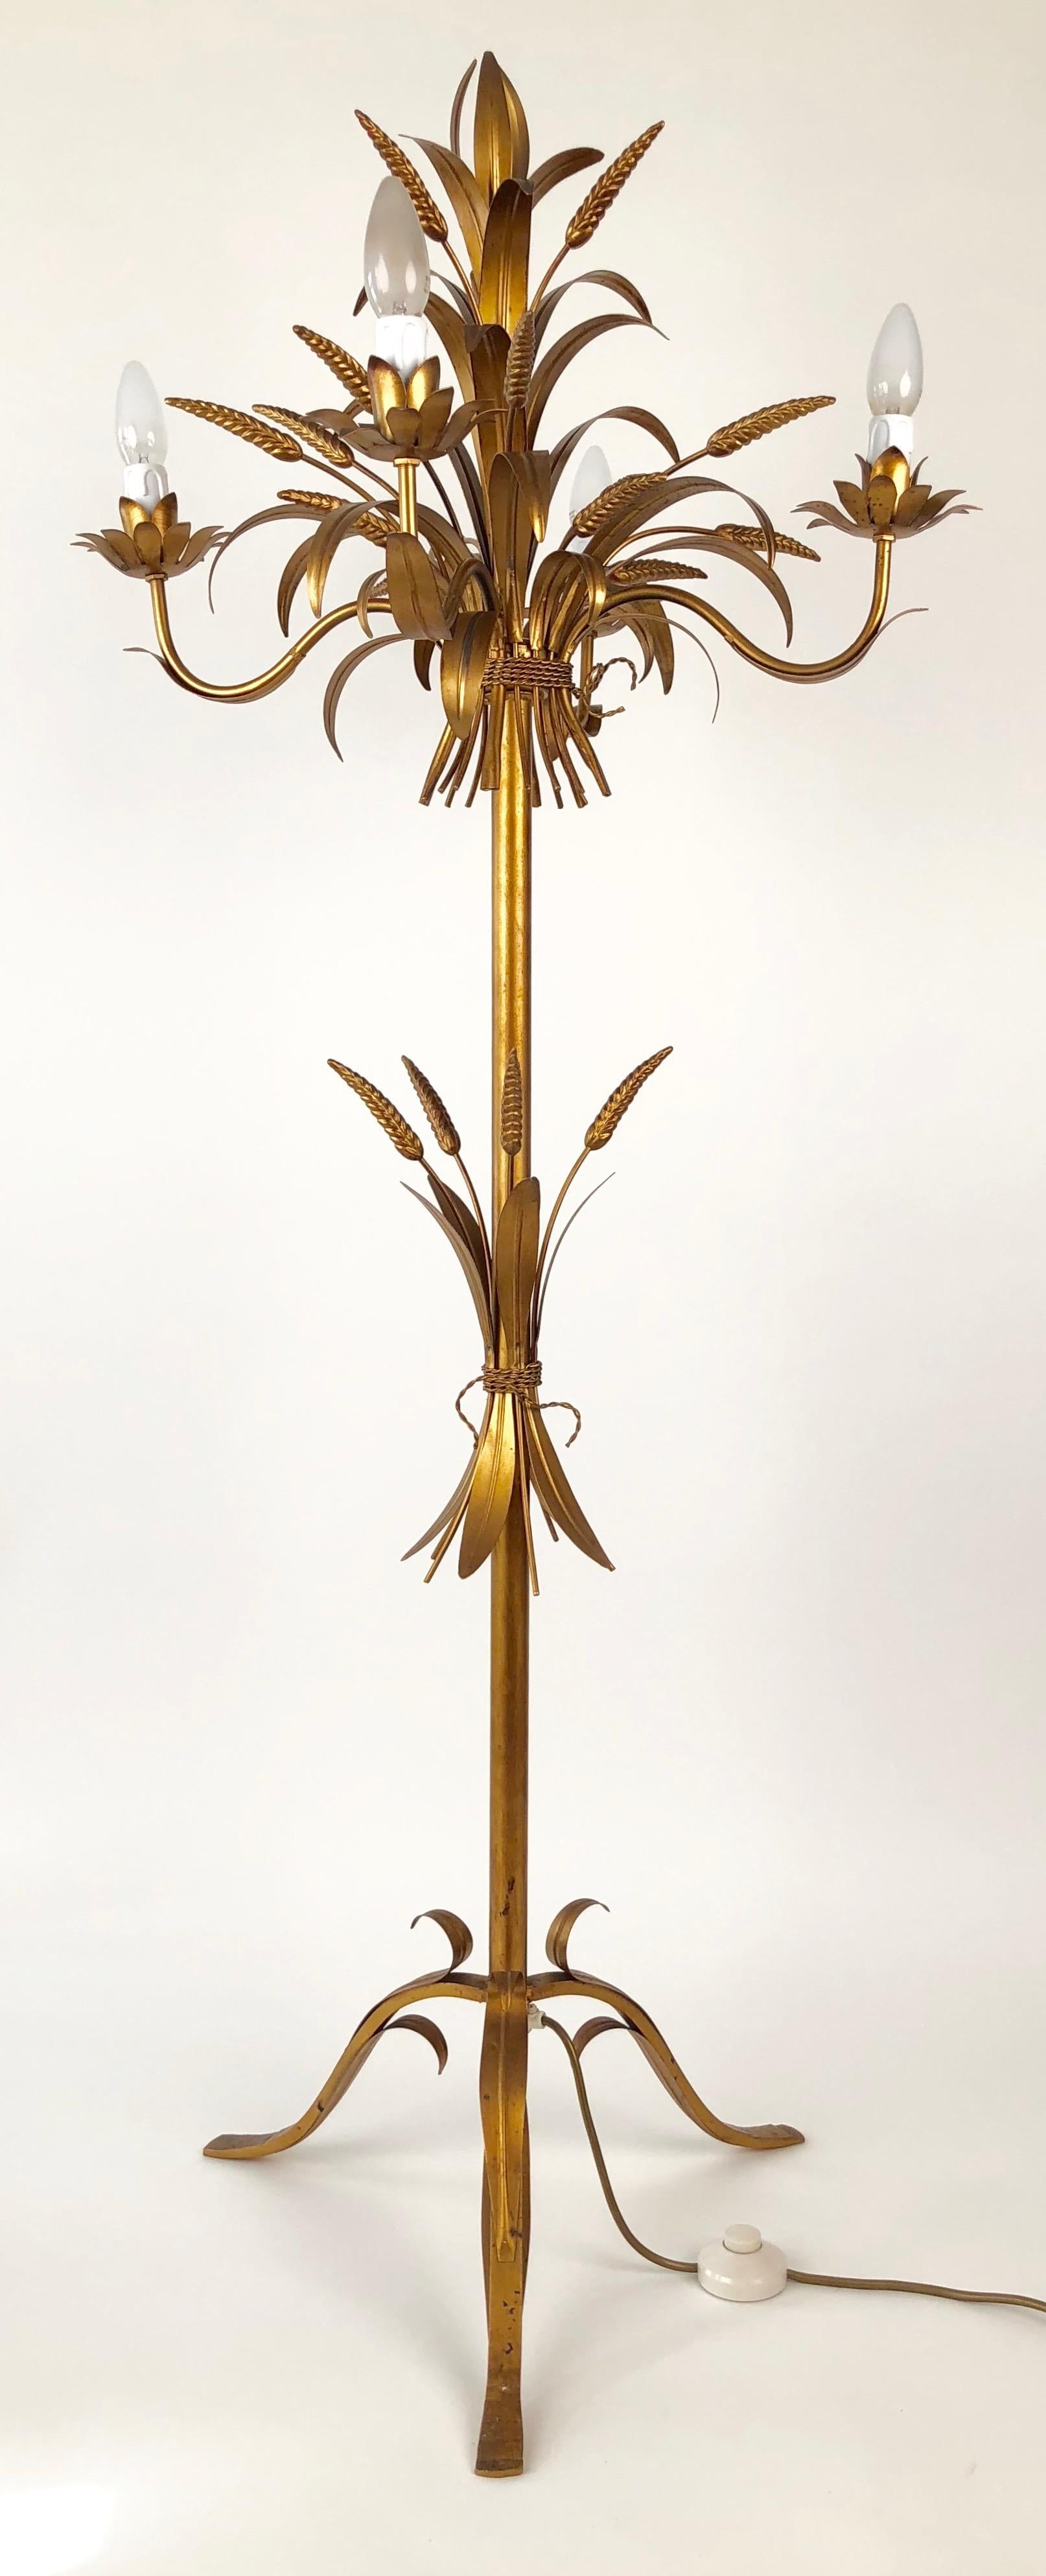 A gilt metal floor lamp from Italy made in the 1960s. This four element candelabra is made up of sheet metal, cast elements and tubing,
that has been hand assembled and coloured. There is sense of Hollywood dramatic in this Regency styled lamp that